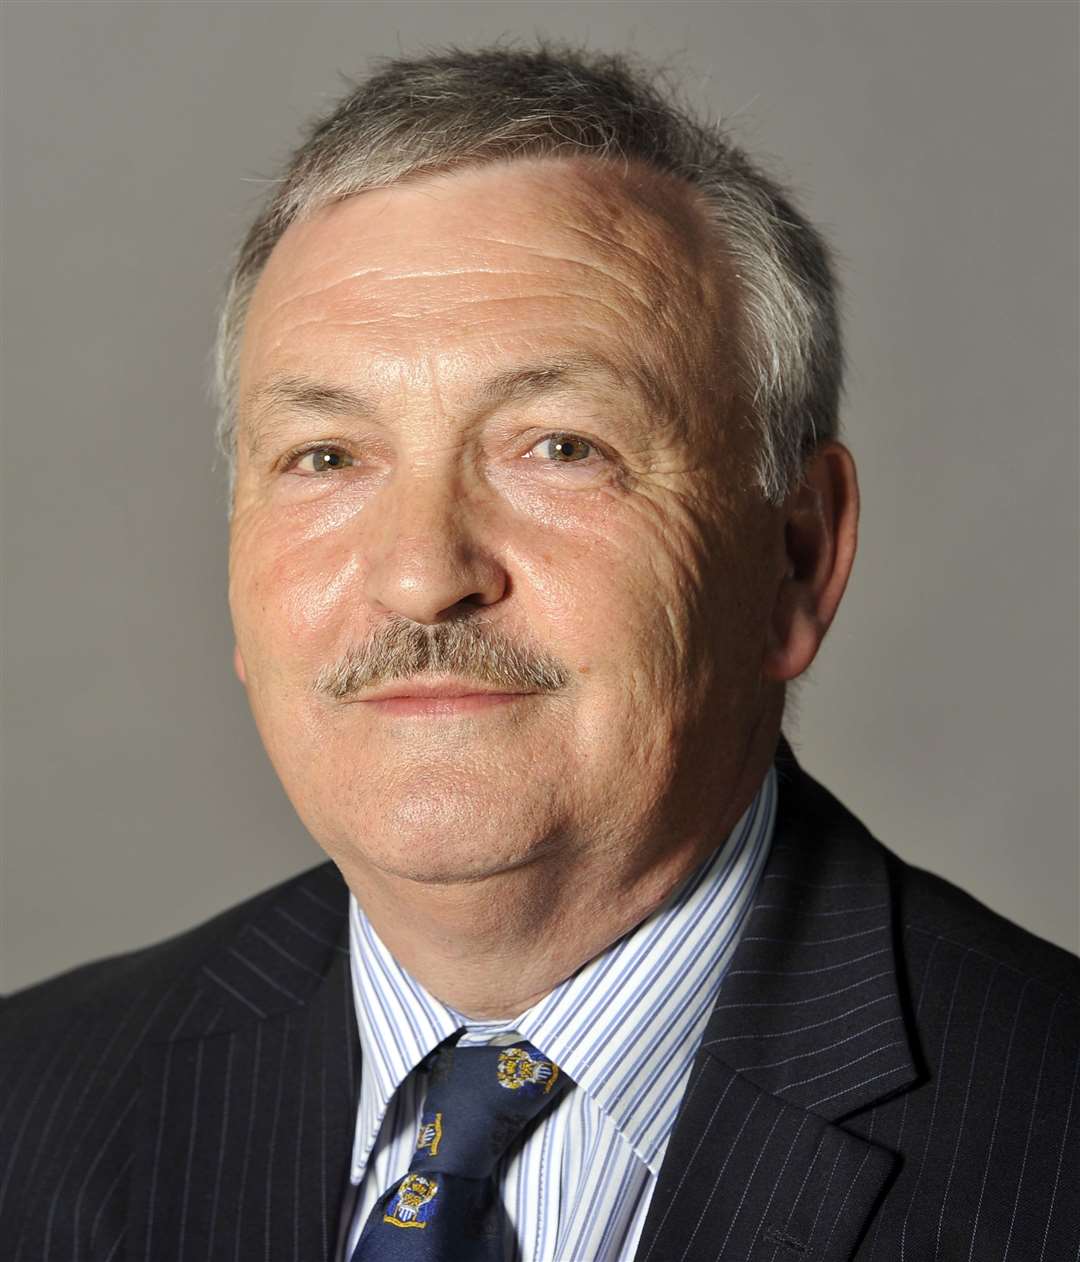 Medway Council leader Alan Jarrett championed Medway's resilience in the face of the coronavirus